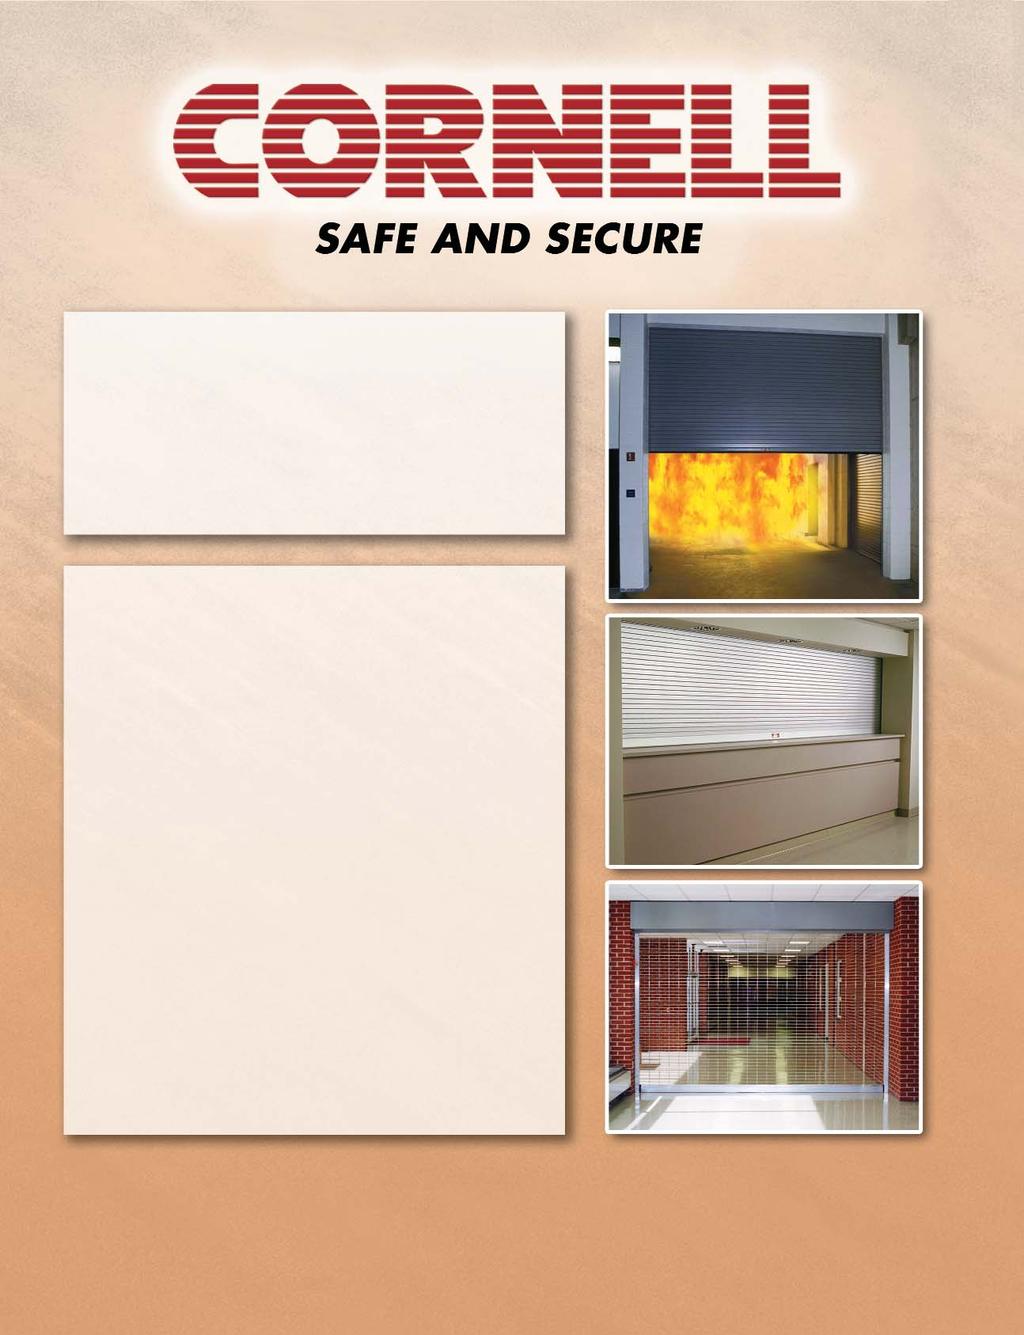 YOUR SINGLE SOURCE FOR EMERGENCY RESPONSE CLOSURE PRODUCTS Coiling Fire Doors Firemiser Insulated Fire Doors SmokeShield Fire Doors SmokeShield Firemiser Doors Coiling Counter Fire Doors SmokeShield